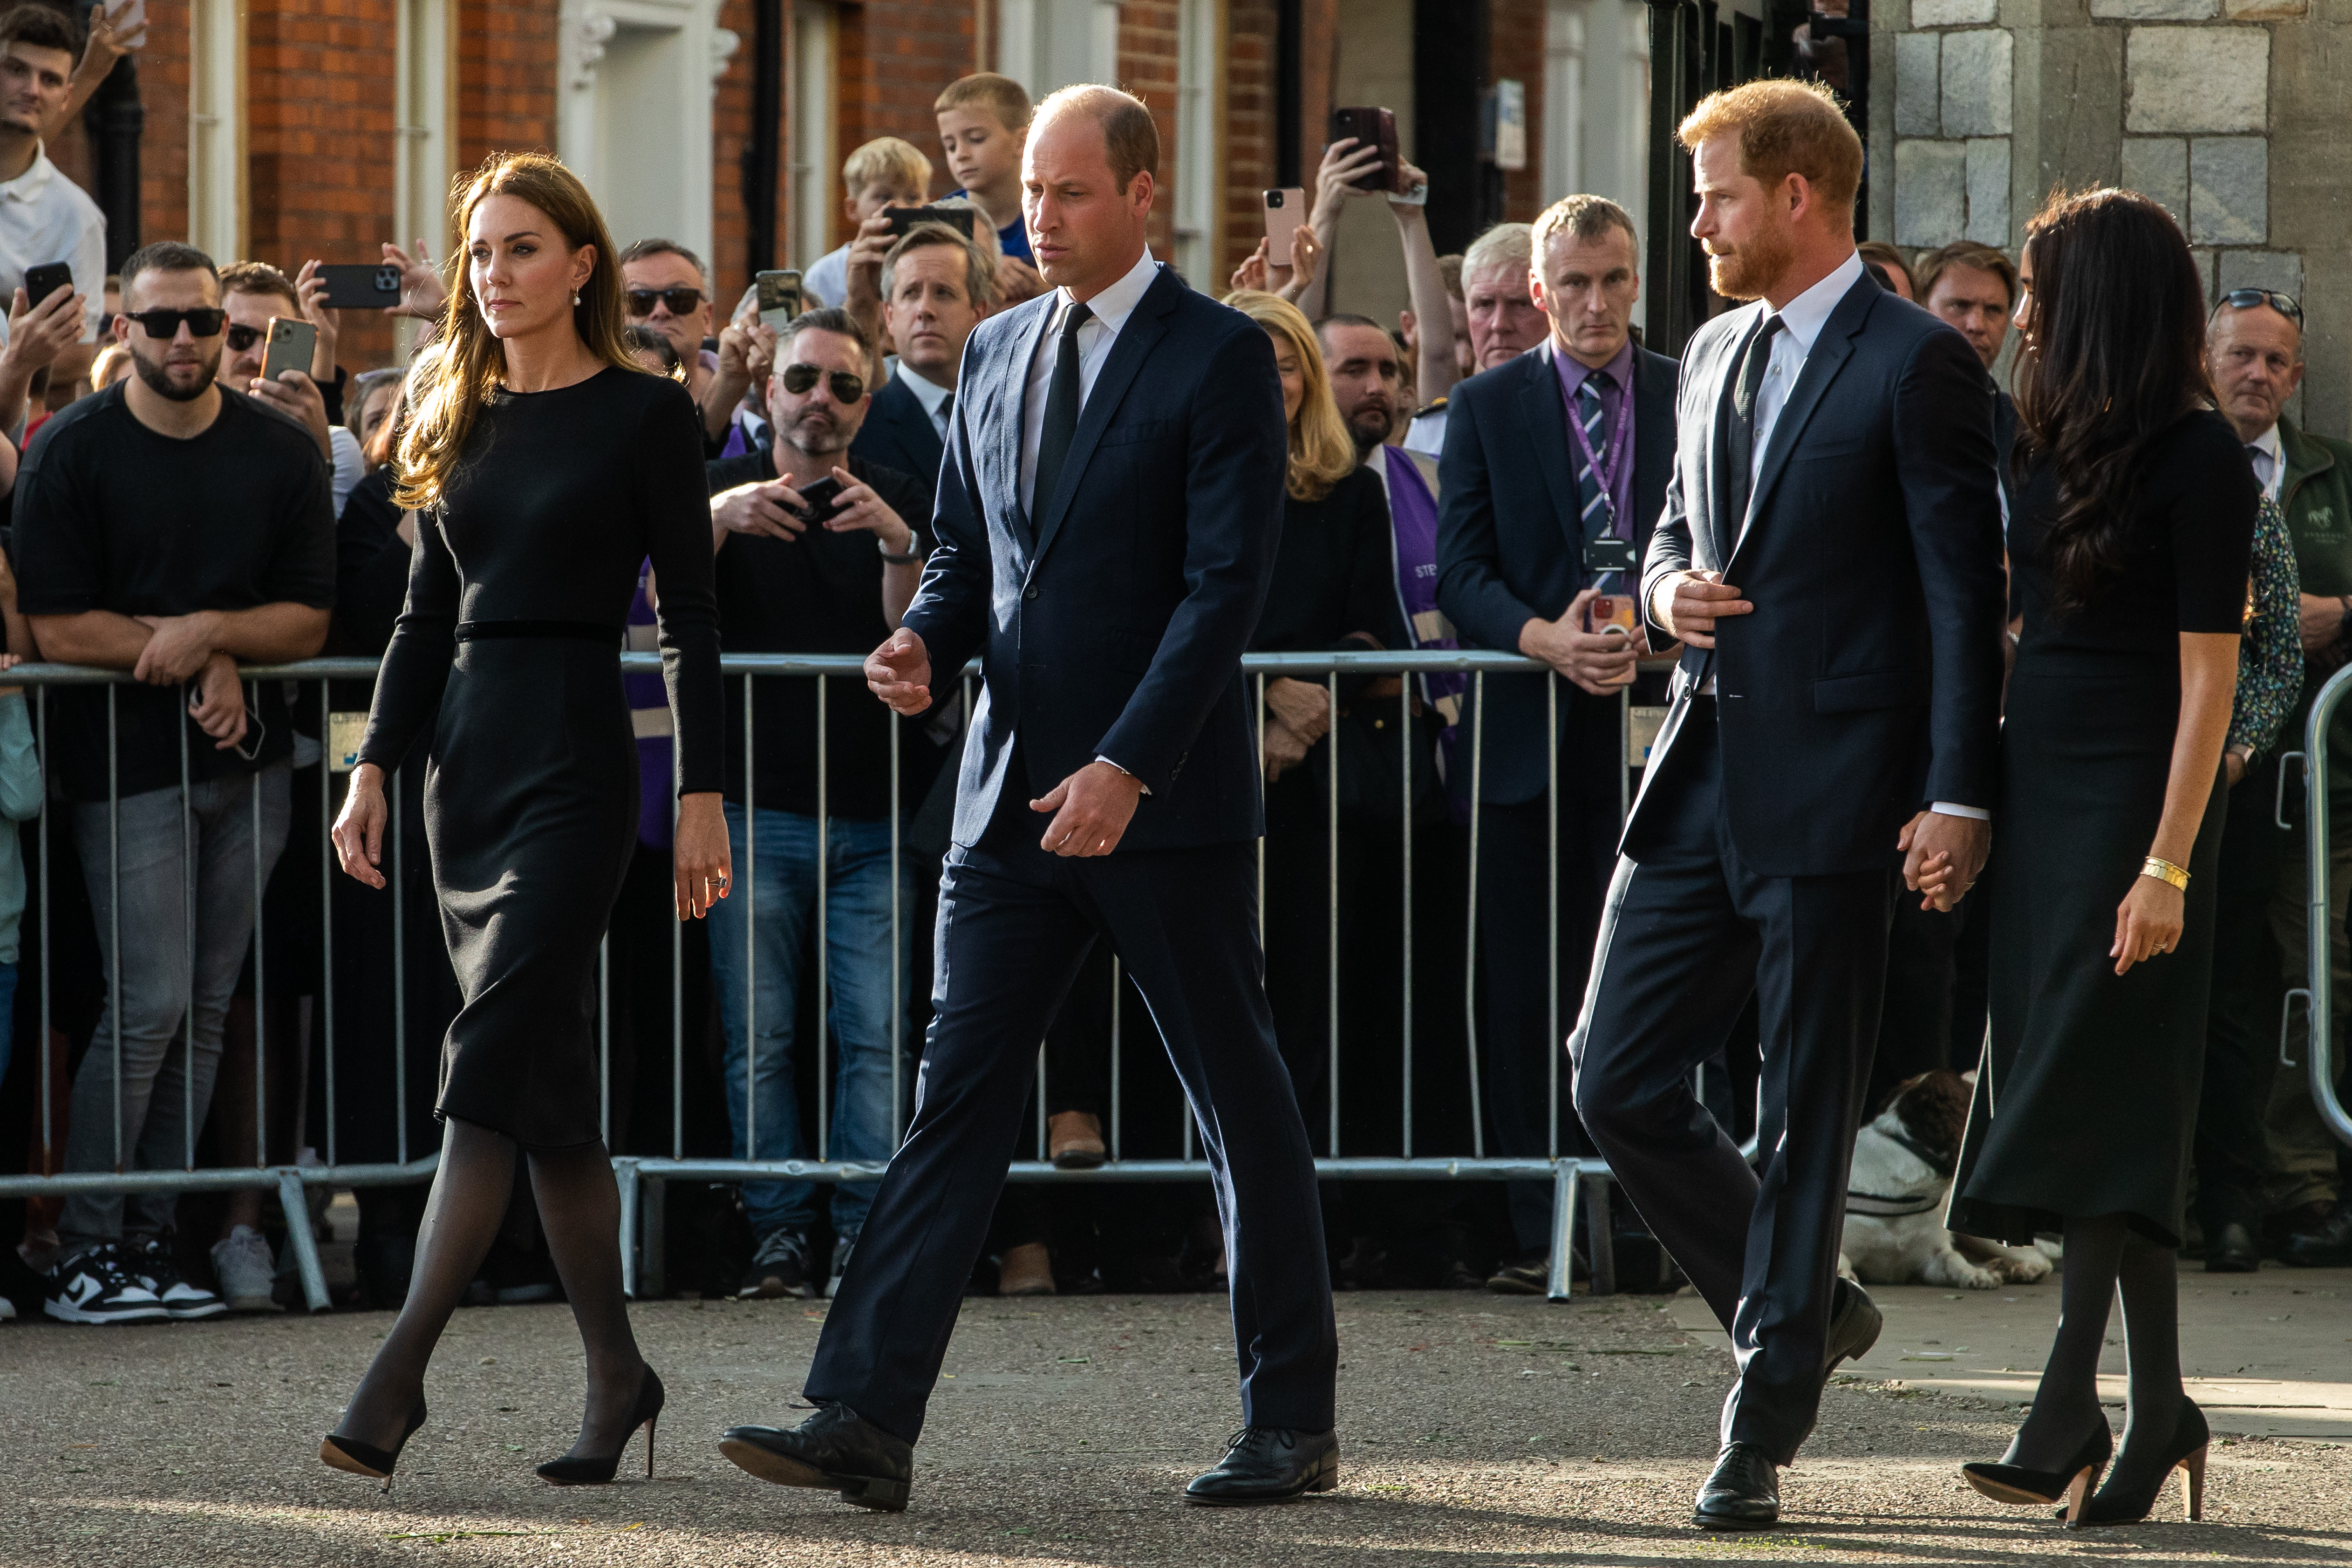 Prince William, Princess Catherine, Prince Harry, and Meghan Markle on a walkabout  Windsor Castle on 10th September 2022 | Source: Getty Images